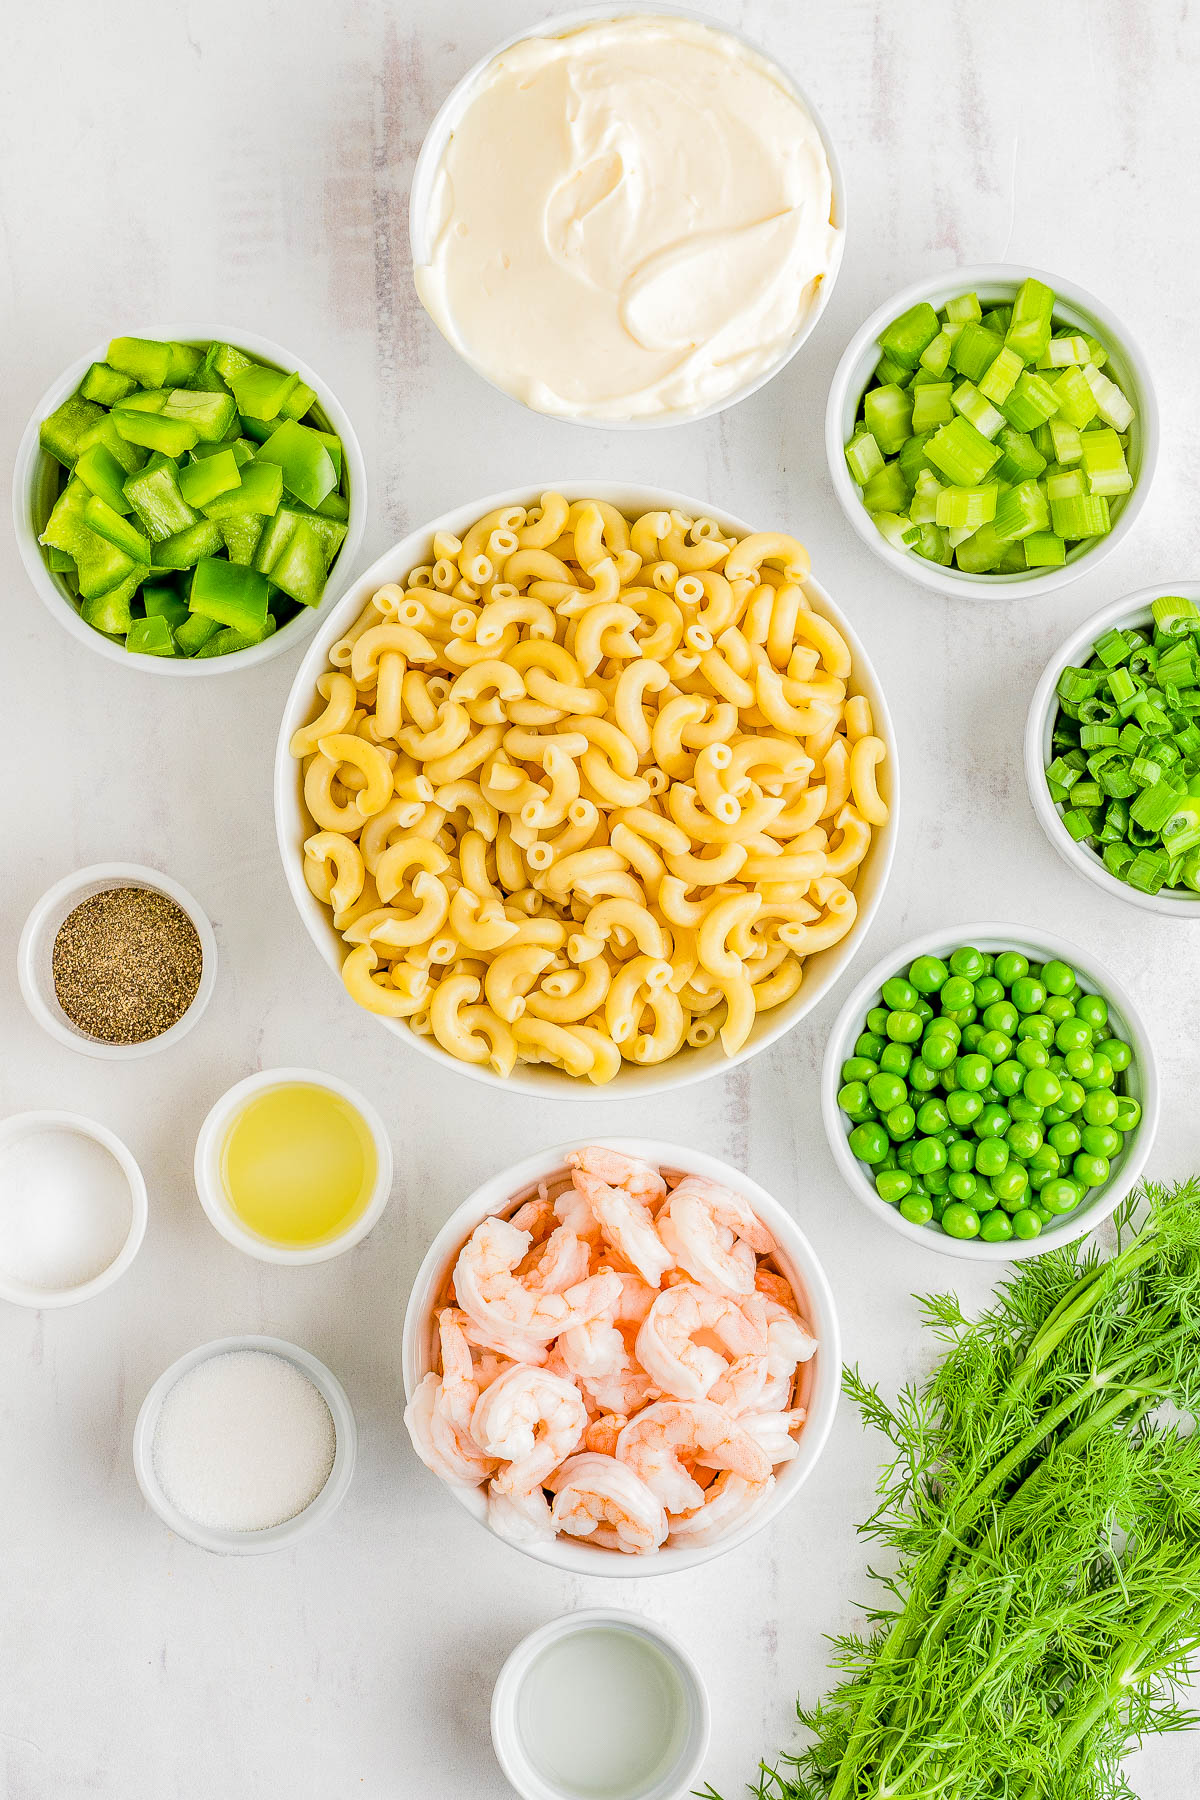 Ingredients for making shrimp pasta salad displayed in small bowls, including cooked macaroni, shrimp, peas, chopped celery, and seasonings on a light surface.